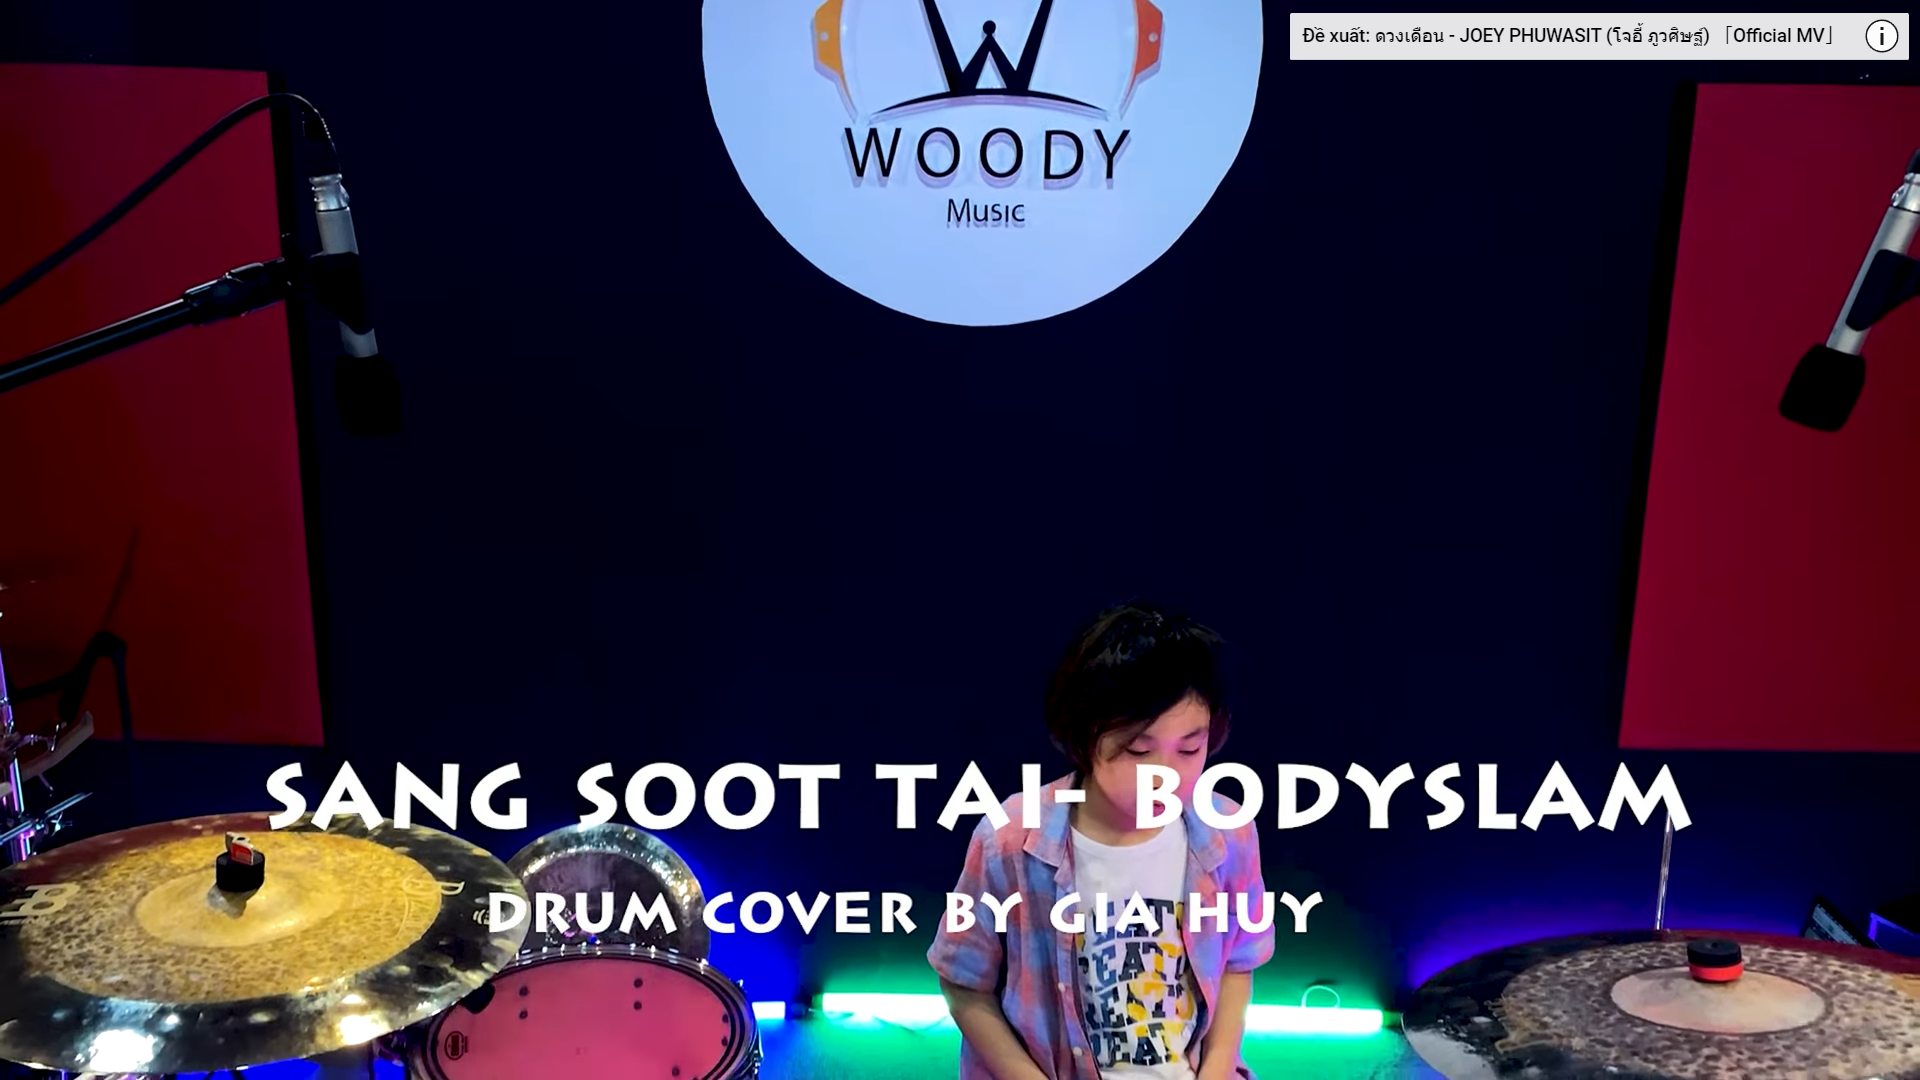 Sang Soot Tai แสงสุดท้าย - Bodyslam (Dumcover by Gia Huy 10 years old)